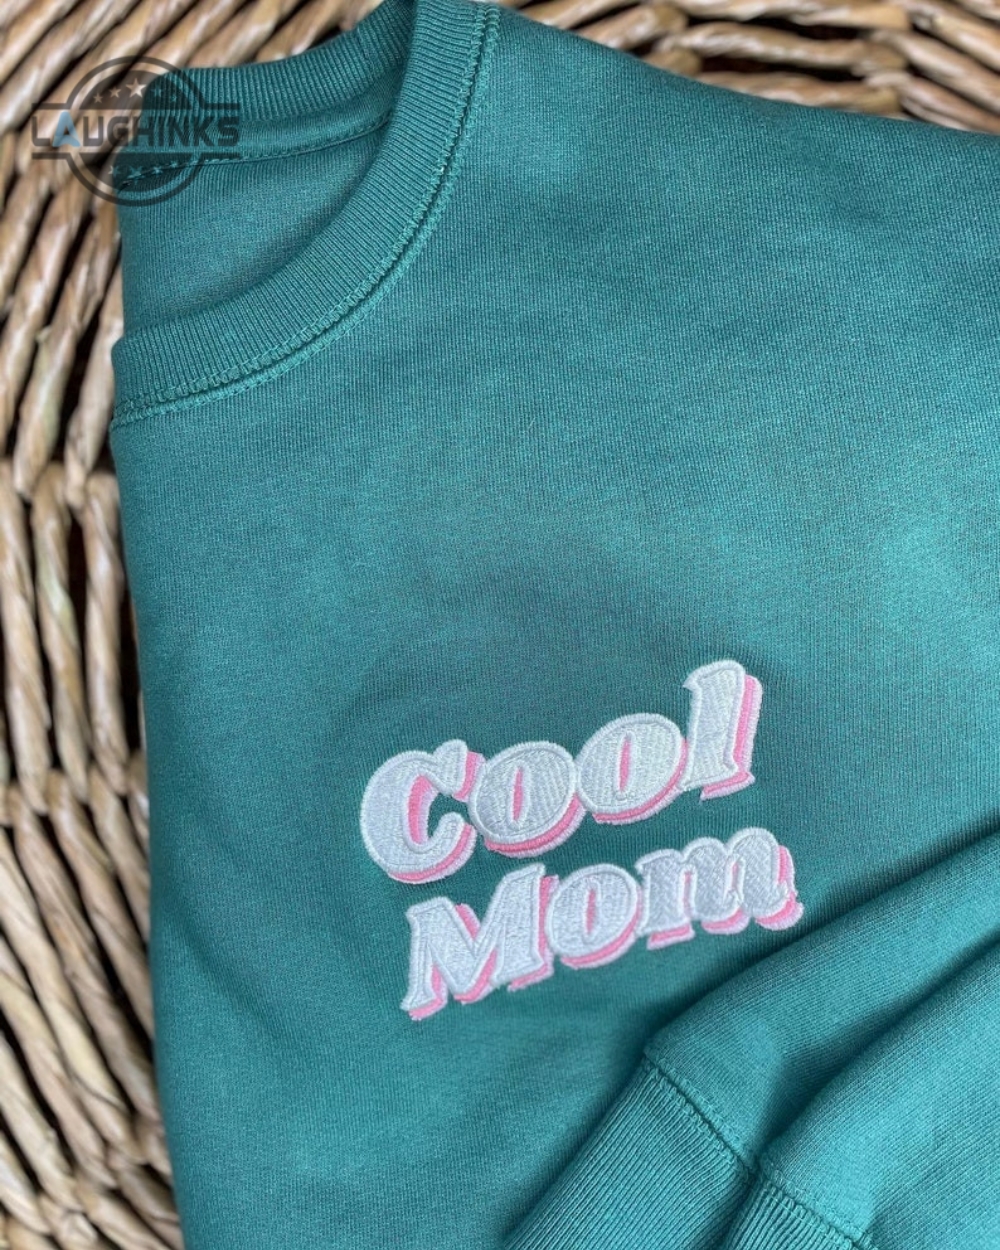 Vintage Cool Mom Retro Trendy Embroidered Crewneck Sweatshirt Crewneck Sweatshirt Cool Mothers Day Gift Embroidery Tshirt Sweatshirt Hoodie Gift